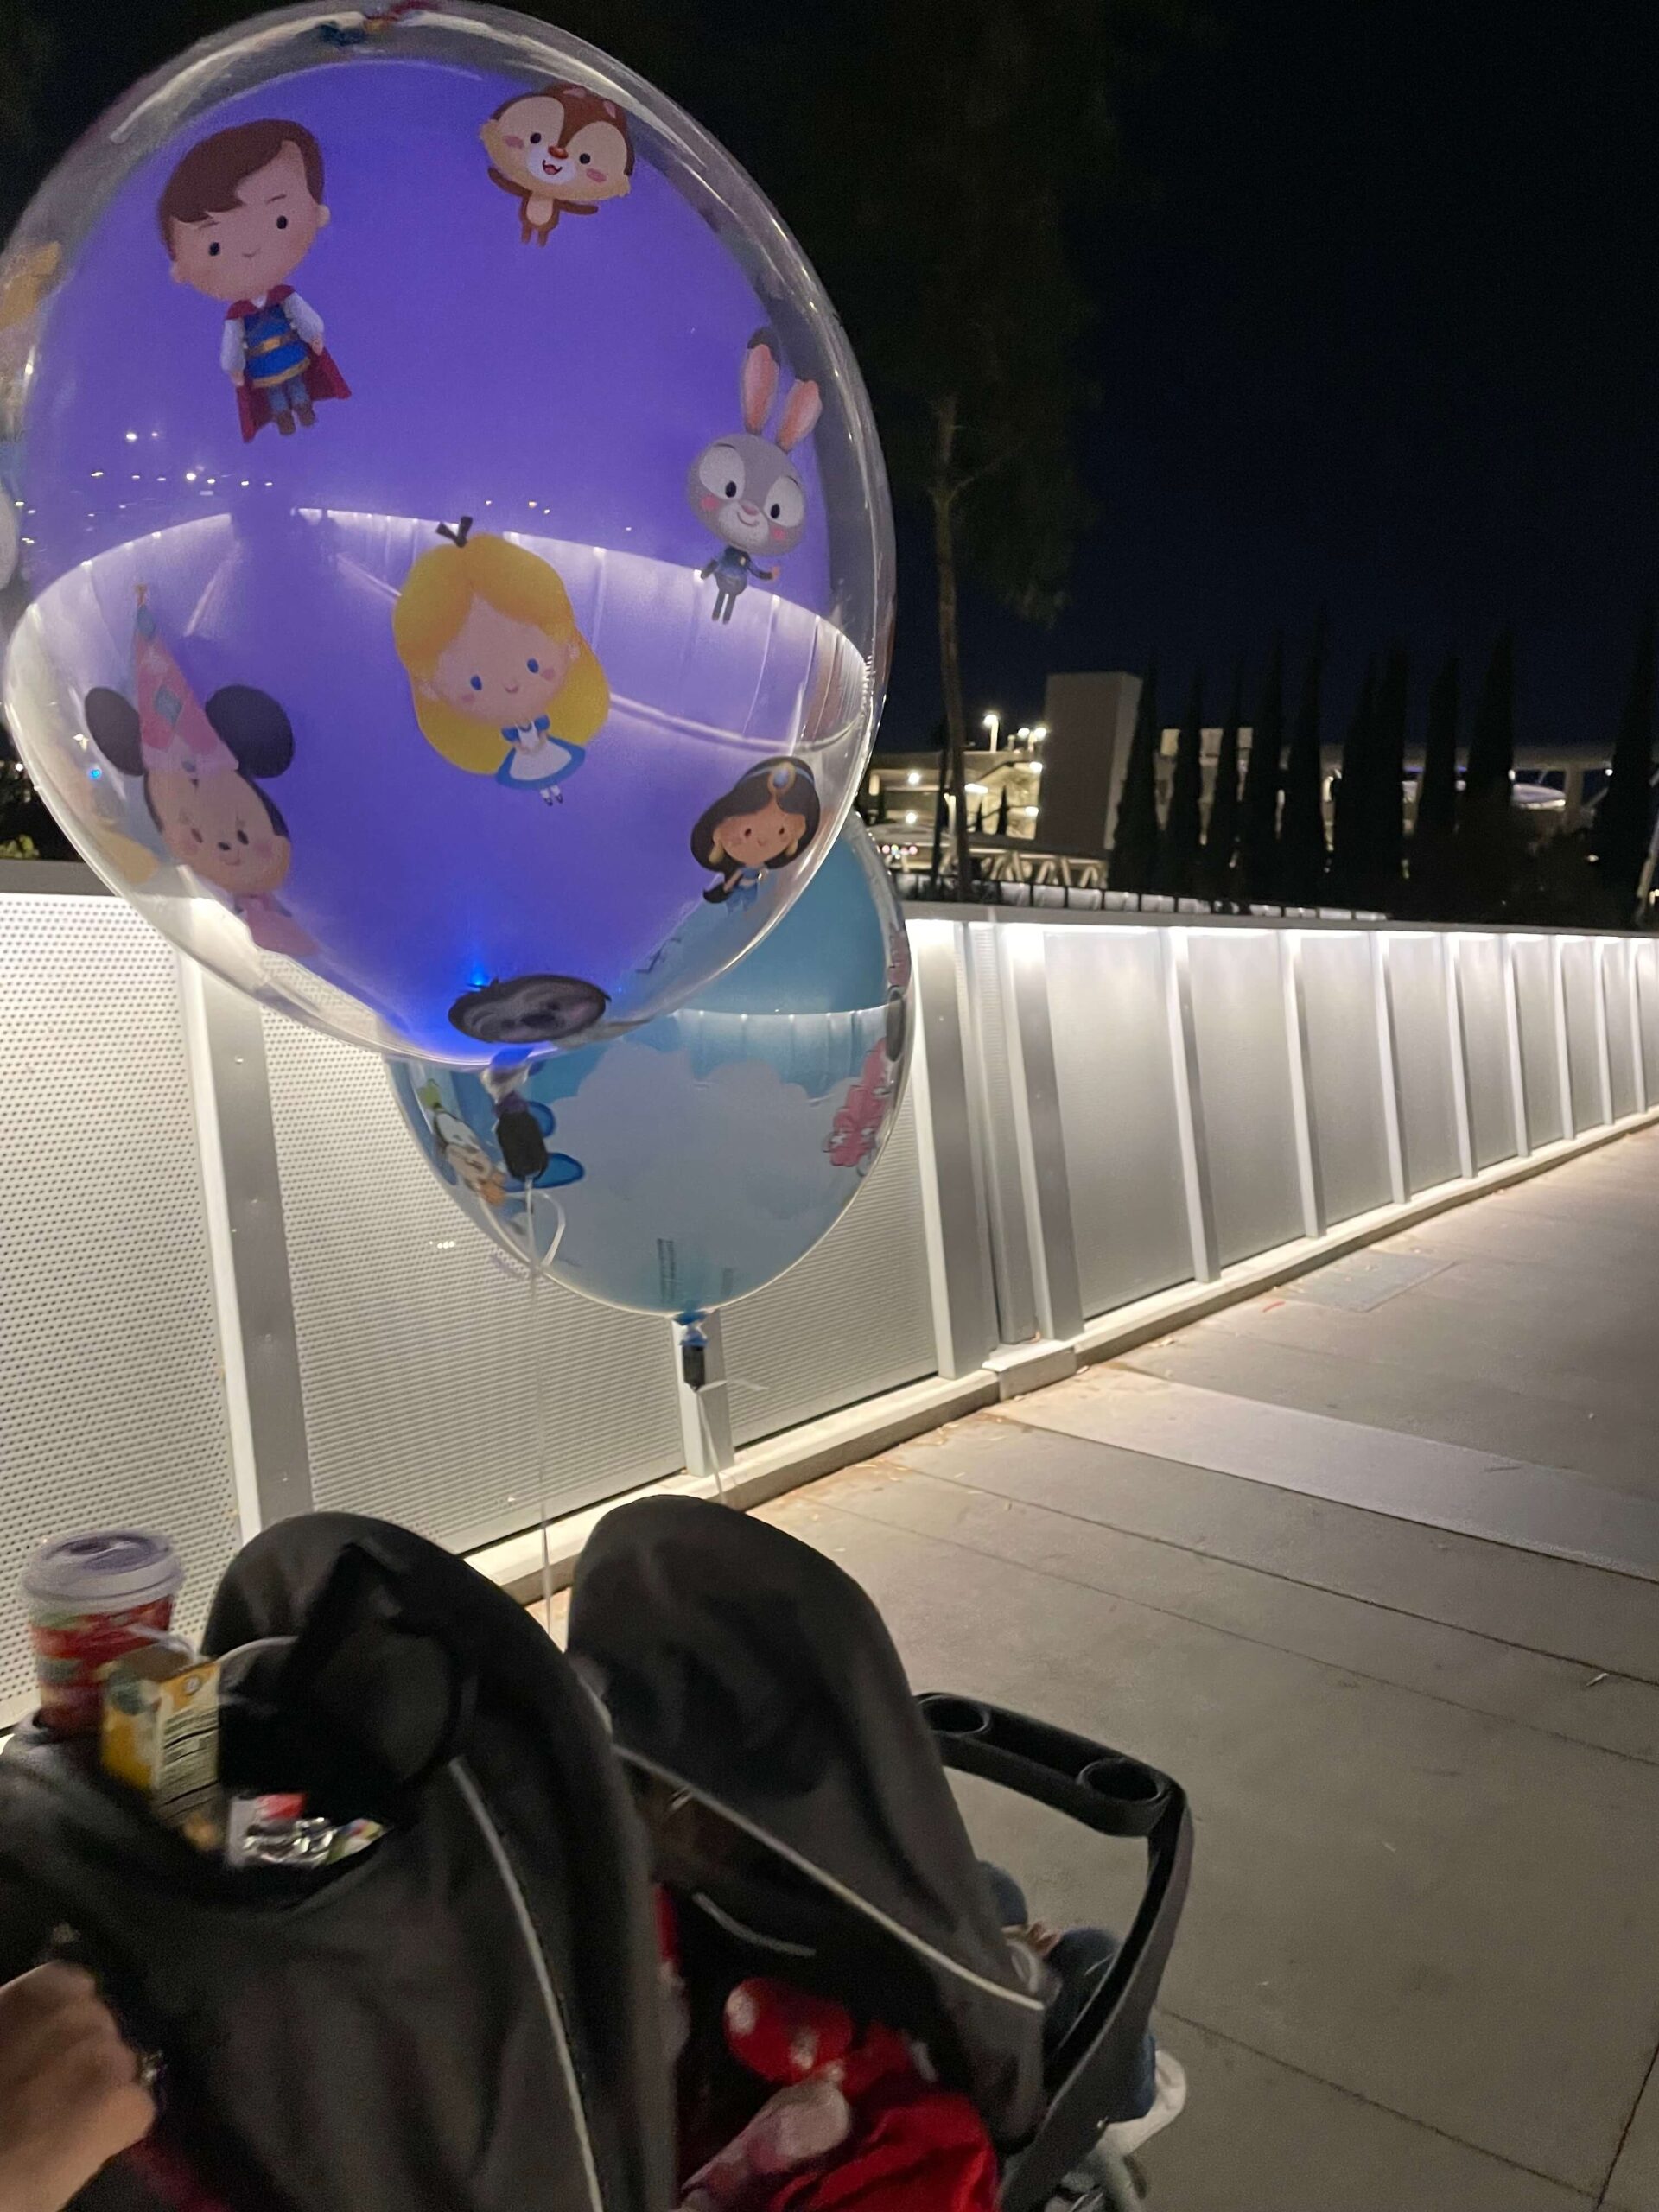 a blue disneyland balloon and a purple balloon at night attached to a stroller